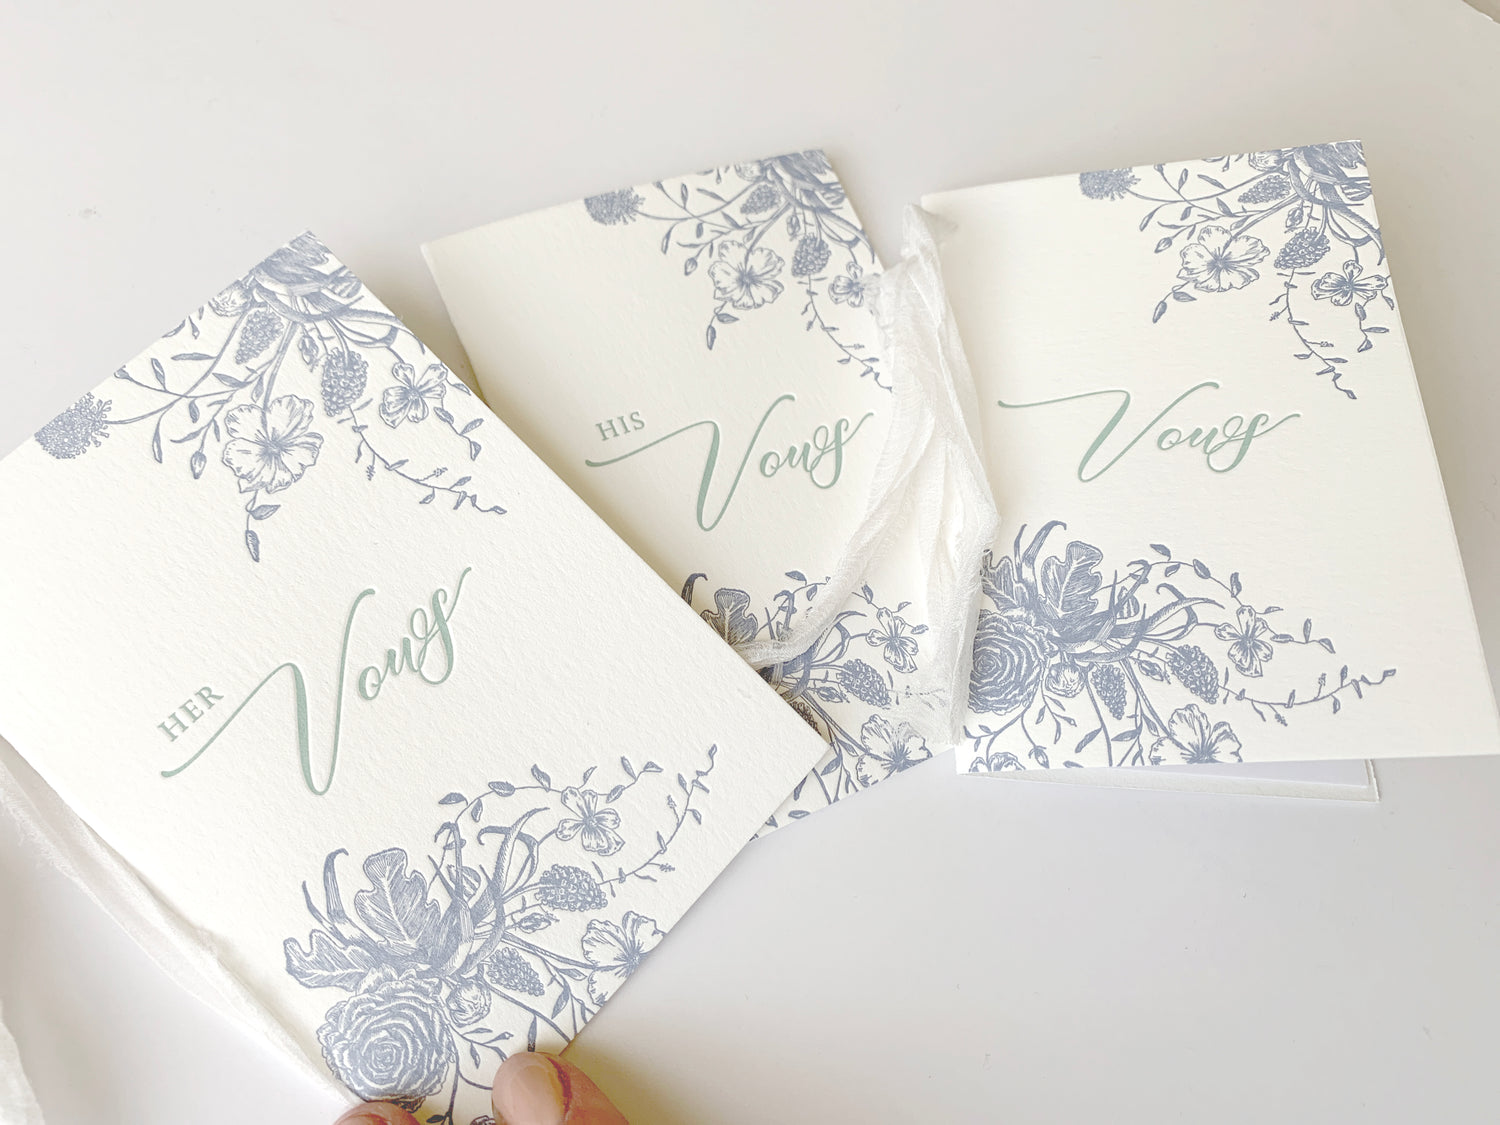 Letterpress vow books with florals that say " Her Vows" or "His Vows" by Rust Belt Love